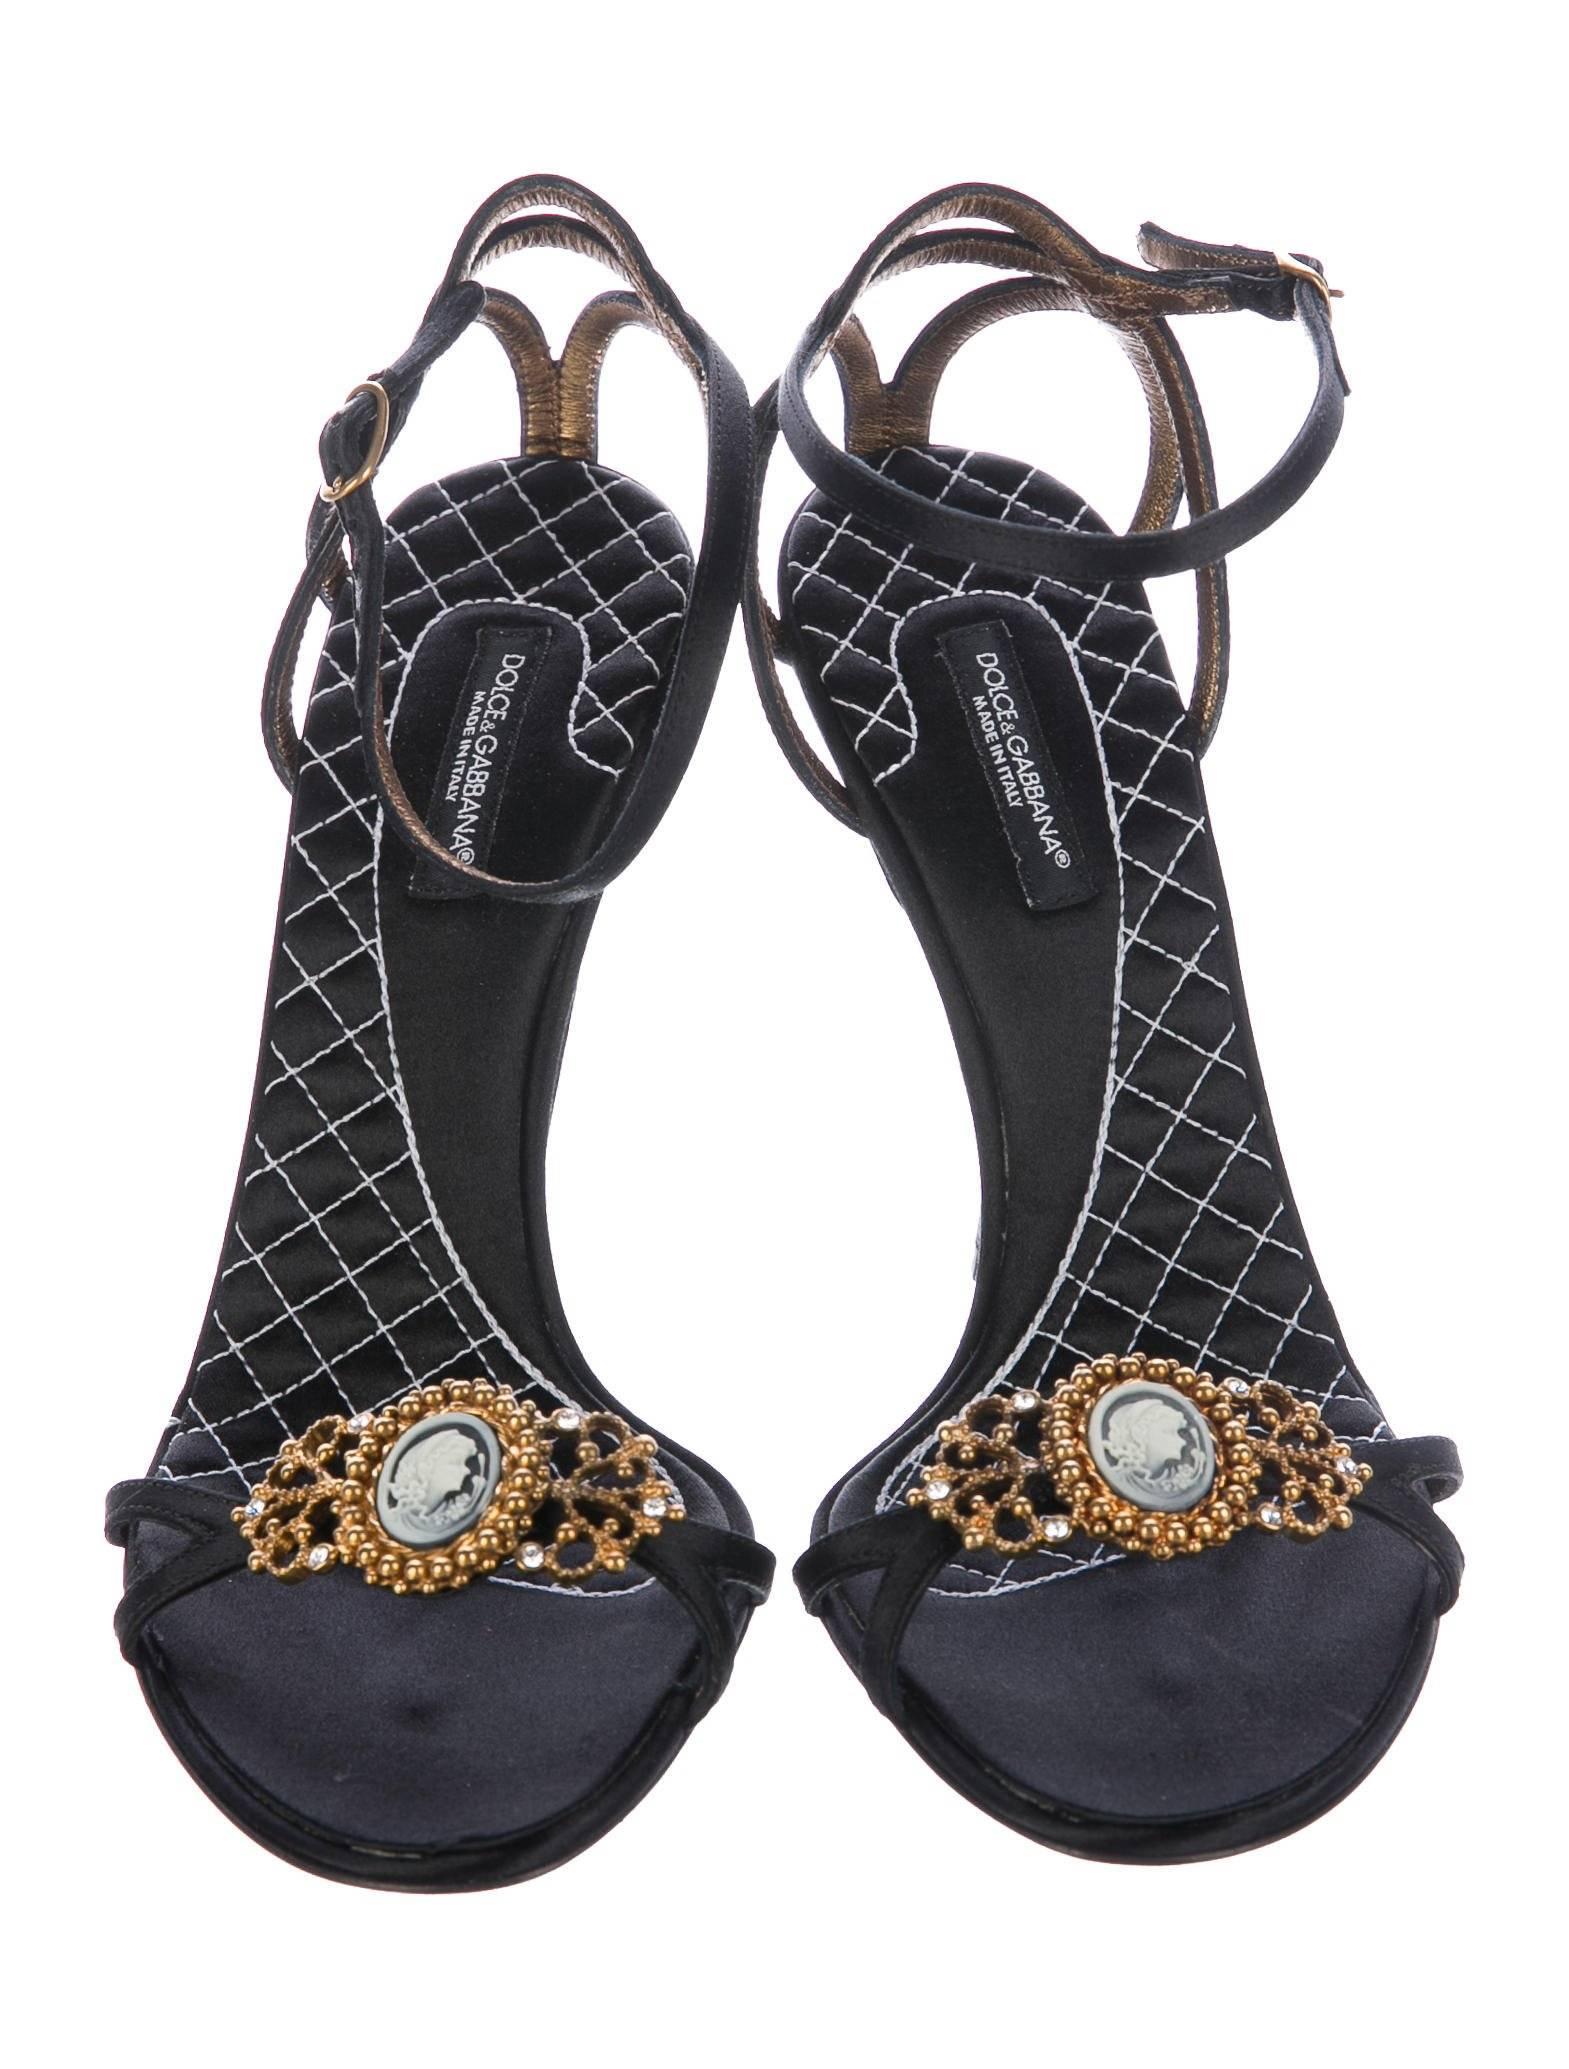 Dolce & Gabbana New Satin Cameo Charm Evening Sandals Heels in Box

Size IT 36.5
Satin
Gold tone hardware
Ankle buckle closure
Made in Italy
Heel height 4.5"
Includes original Dolce & Gabbana dust bag and box